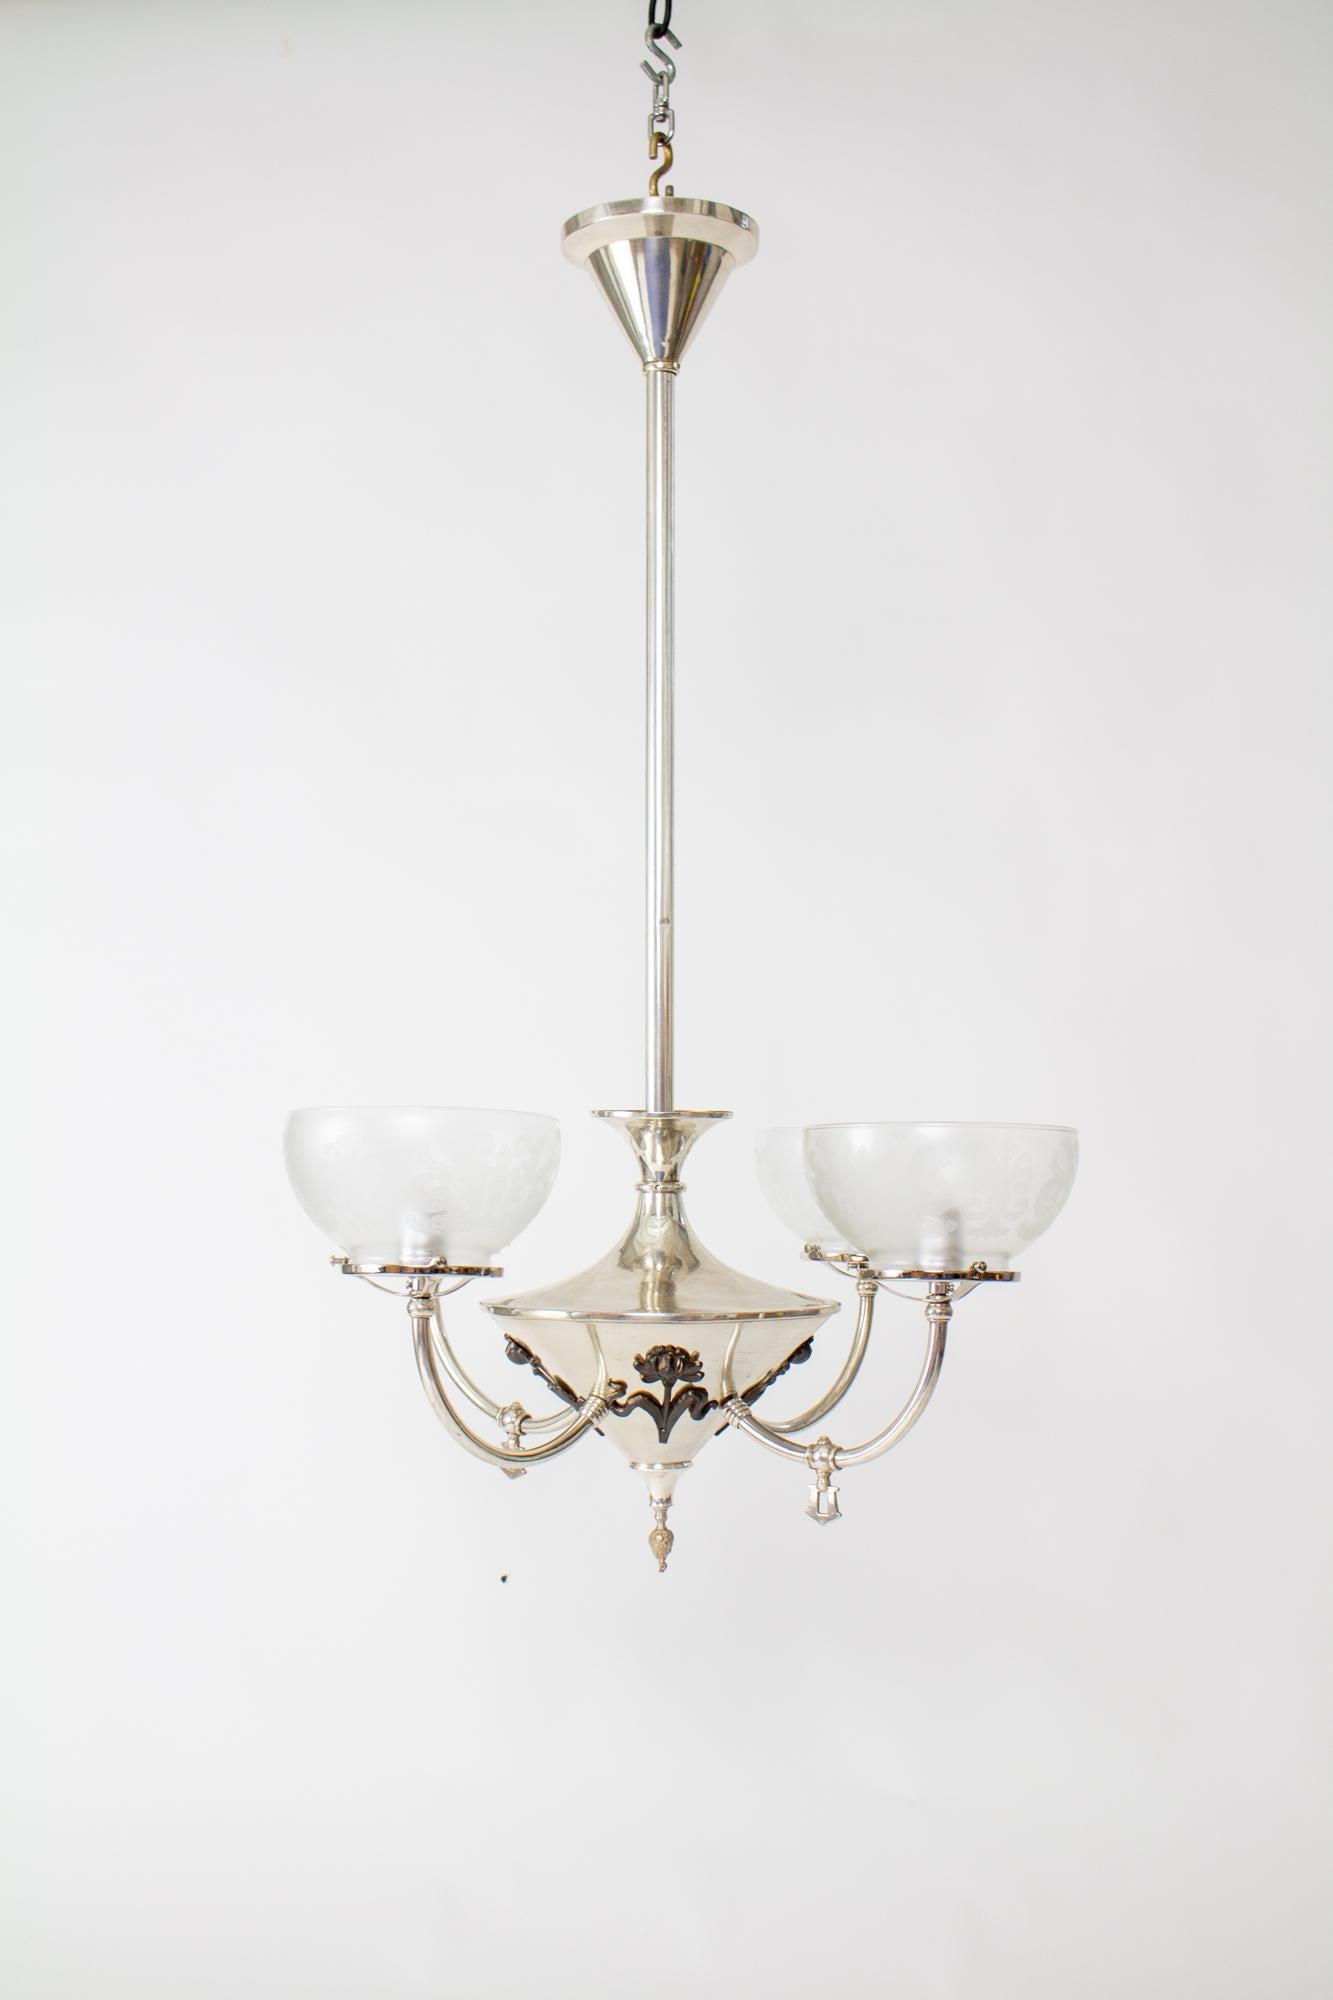 Turn of the century silver art nouveau gas and electric chandelier. Conical shaped canopy and body with four arms curving up. The chandelier is silver plate with flowers on the body in a contrasting dark patina. Two of the arms were originally gas,